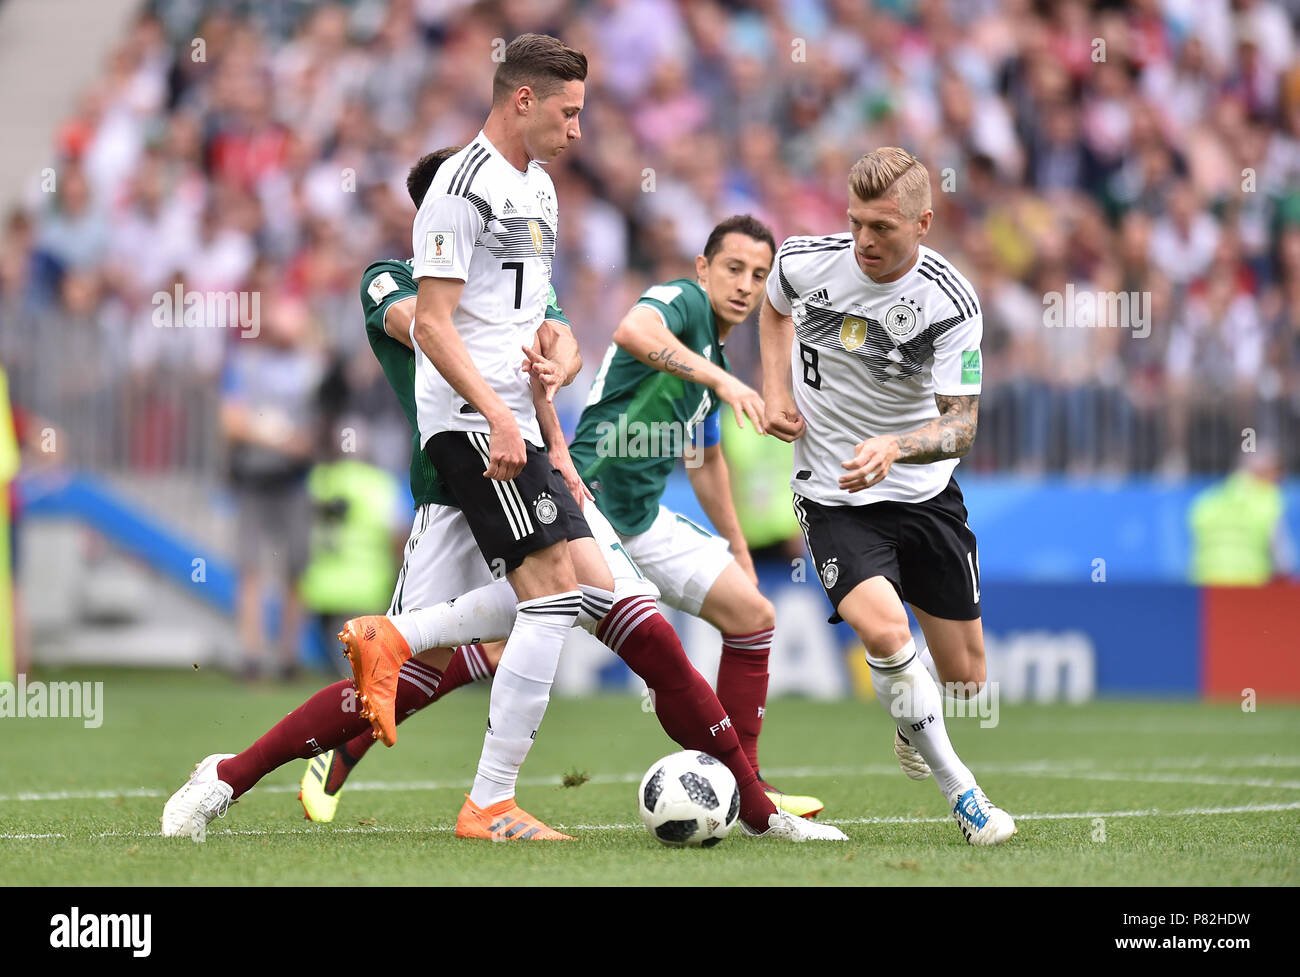 MOSCOW, RUSSIA - JUNE 17: Julian Draxler and Toni Kroos of Germany in action during the 2018 FIFA World Cup Russia group F match between Germany and Mexico at Luzhniki Stadium on June 17, 2018 in Moscow, Russia. (Photo by Lukasz Laskowski/PressFocus/MB Media) Stock Photo